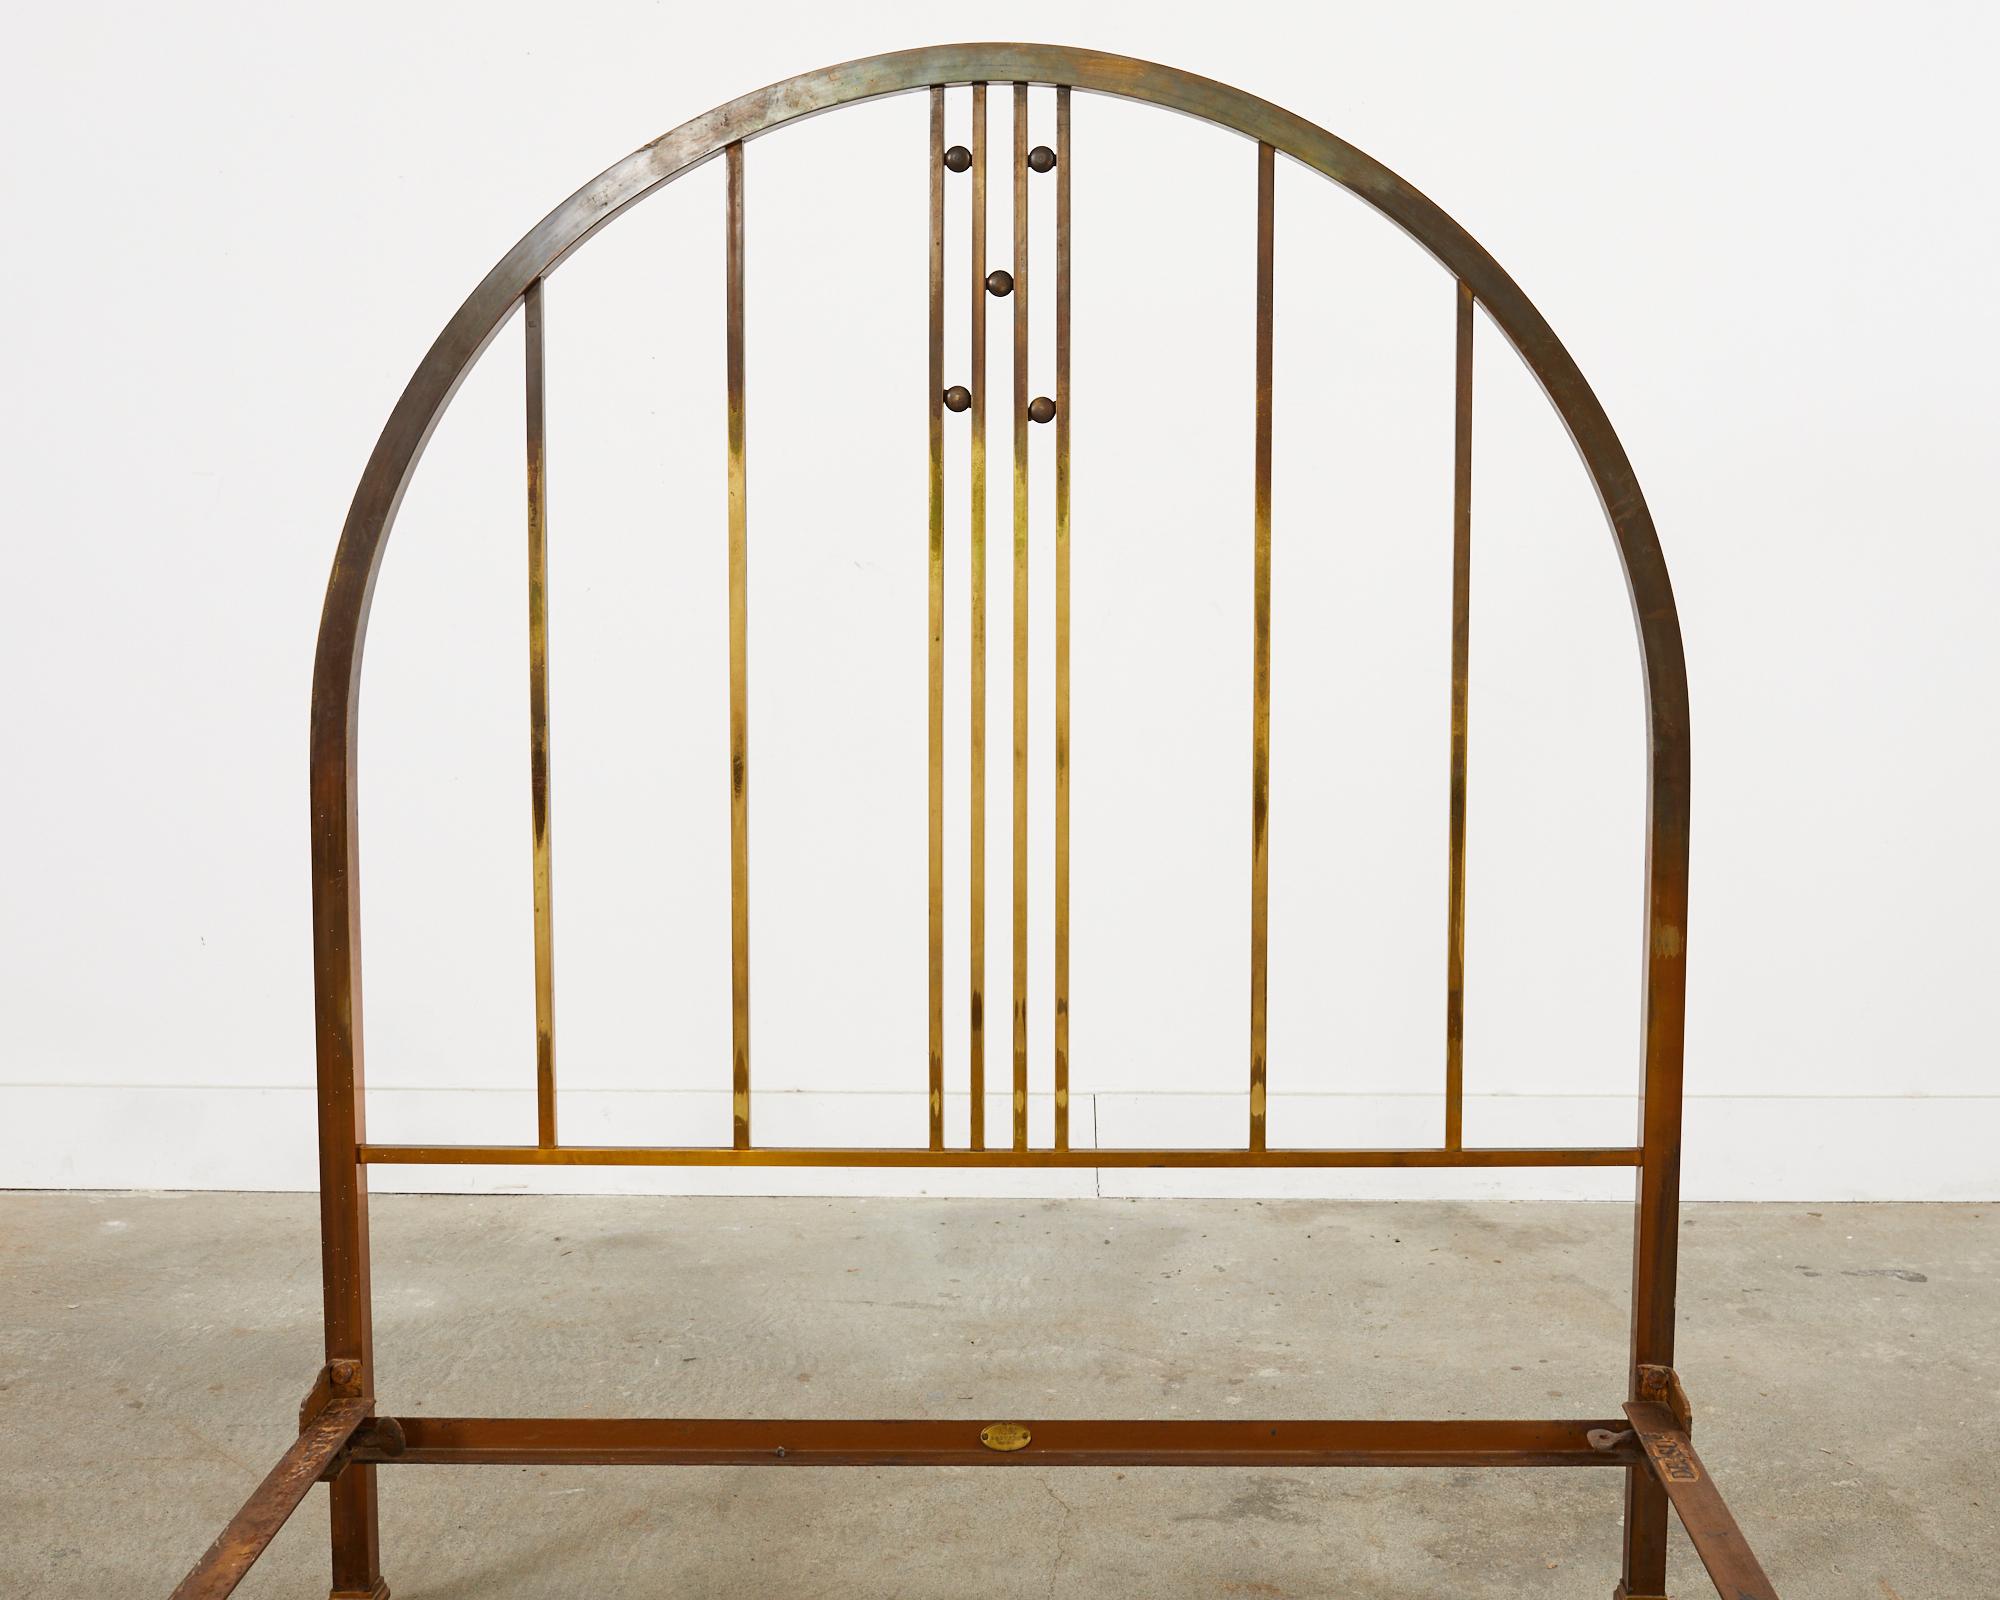 20th Century French Art Deco Period Patinated Brass Bed Frame For Sale